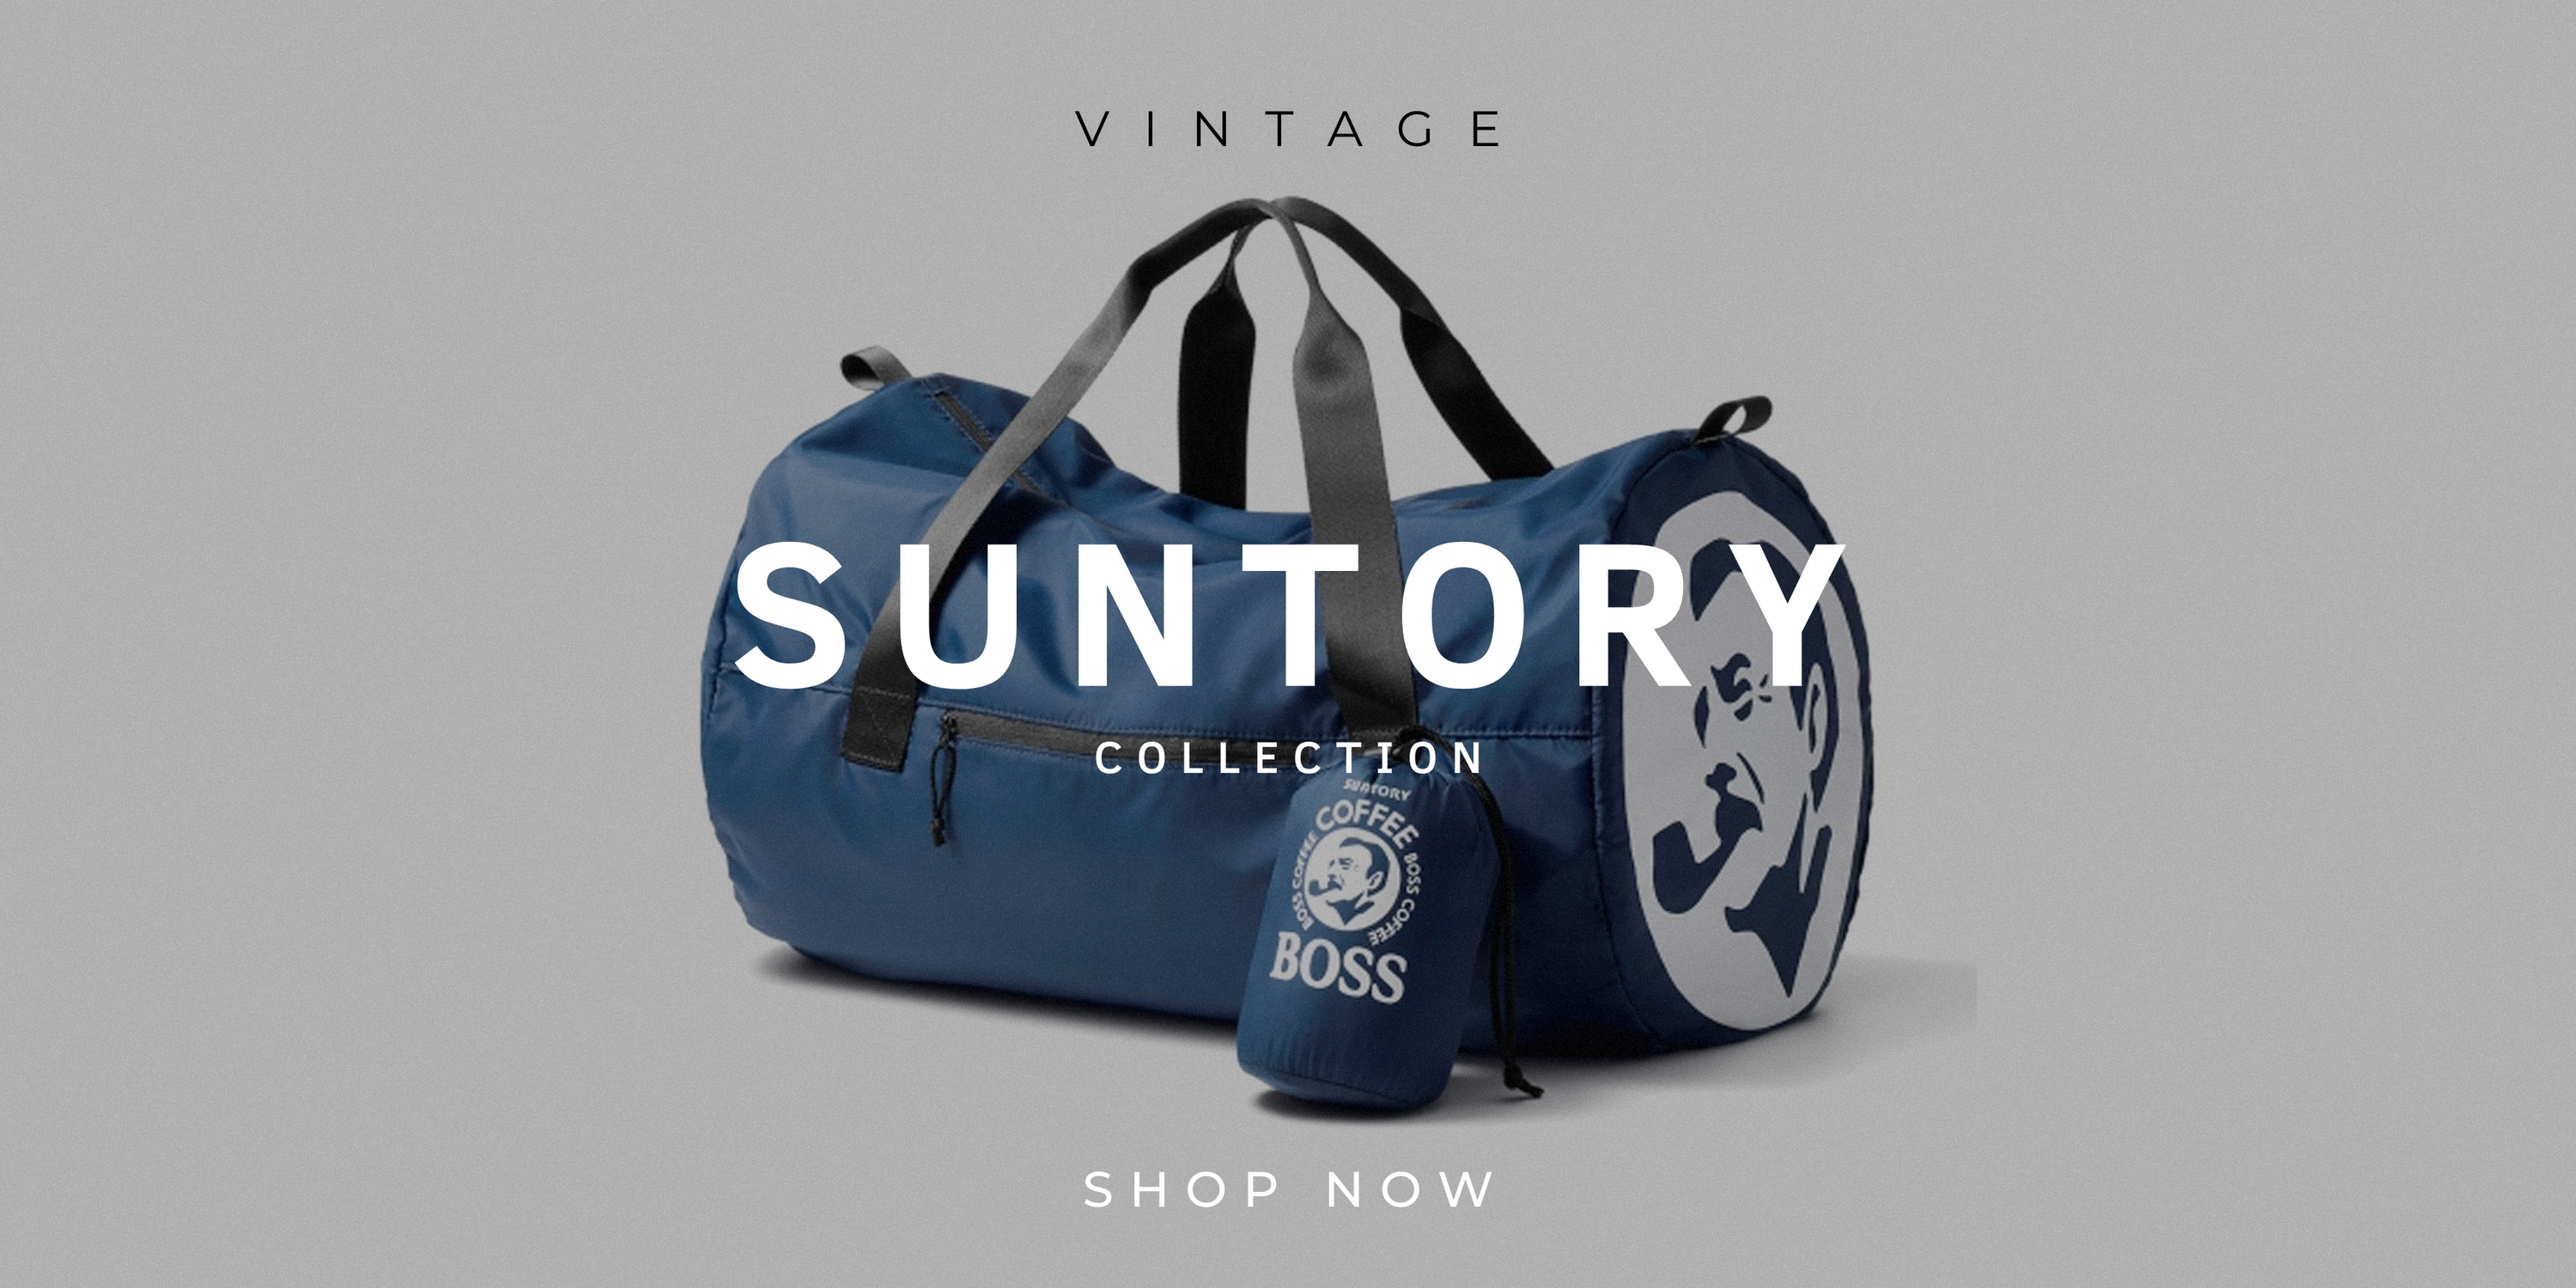 Vintage Suntory Collection Banner